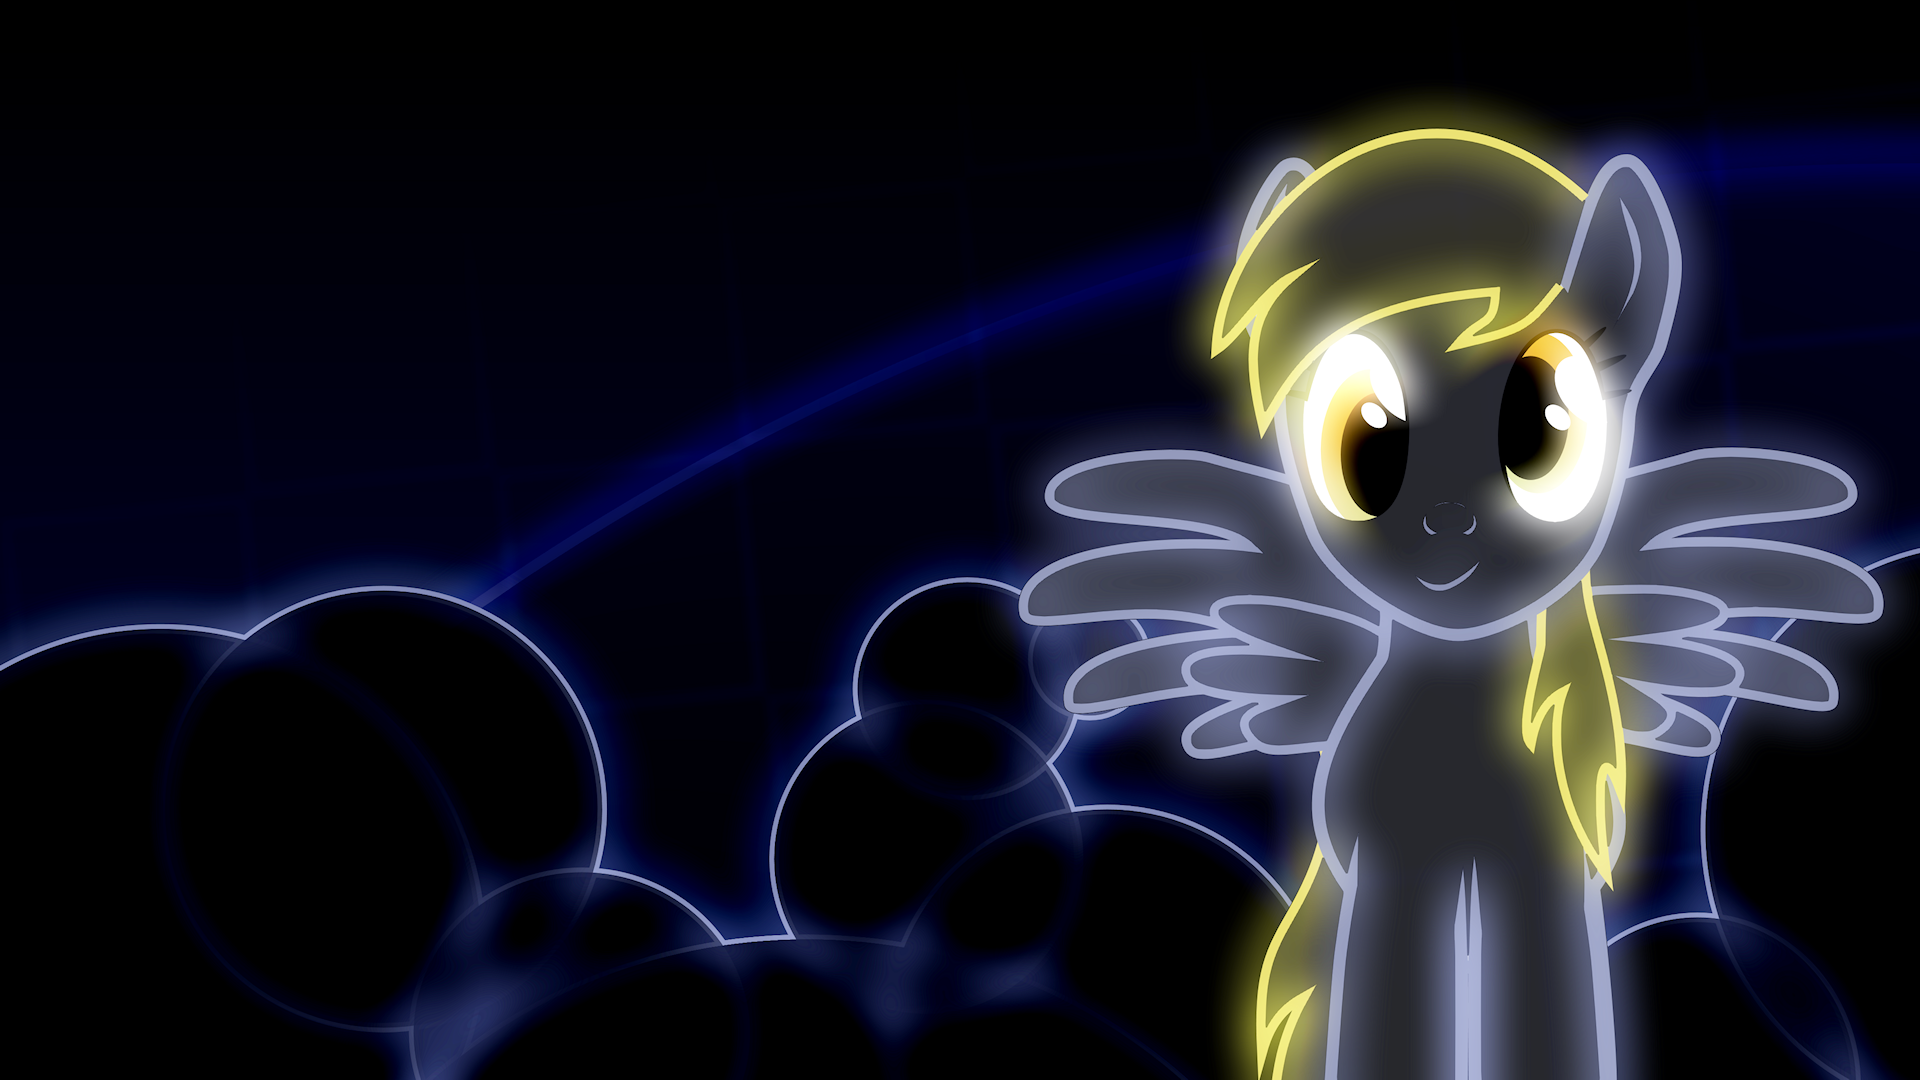 Download Derpy Hooves wallpapers for mobile phone free Derpy Hooves HD  pictures